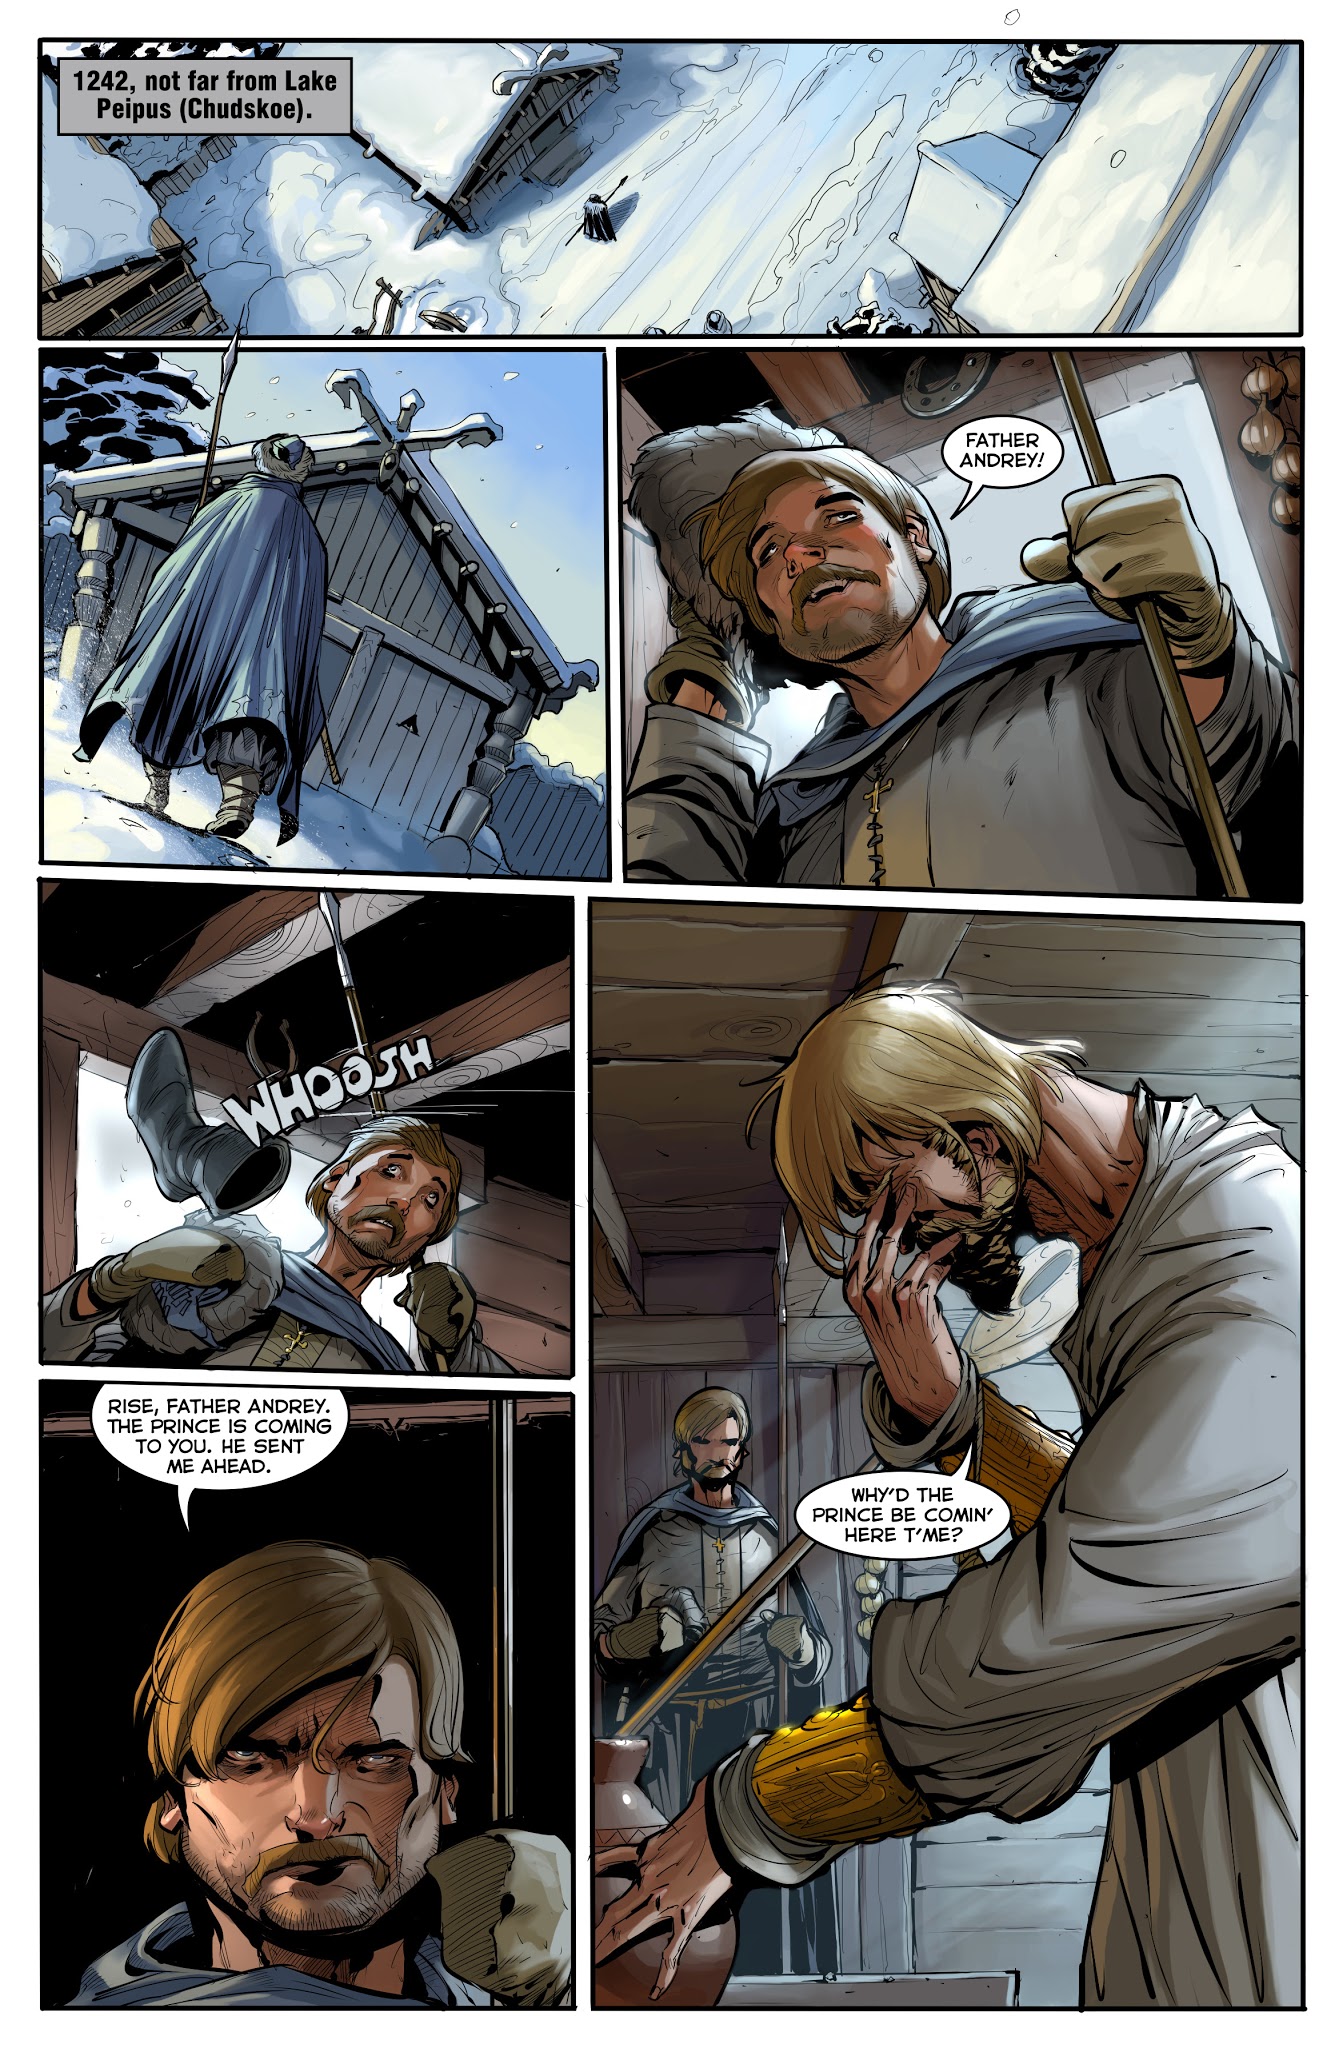 Read online Friar comic -  Issue #12 - 6